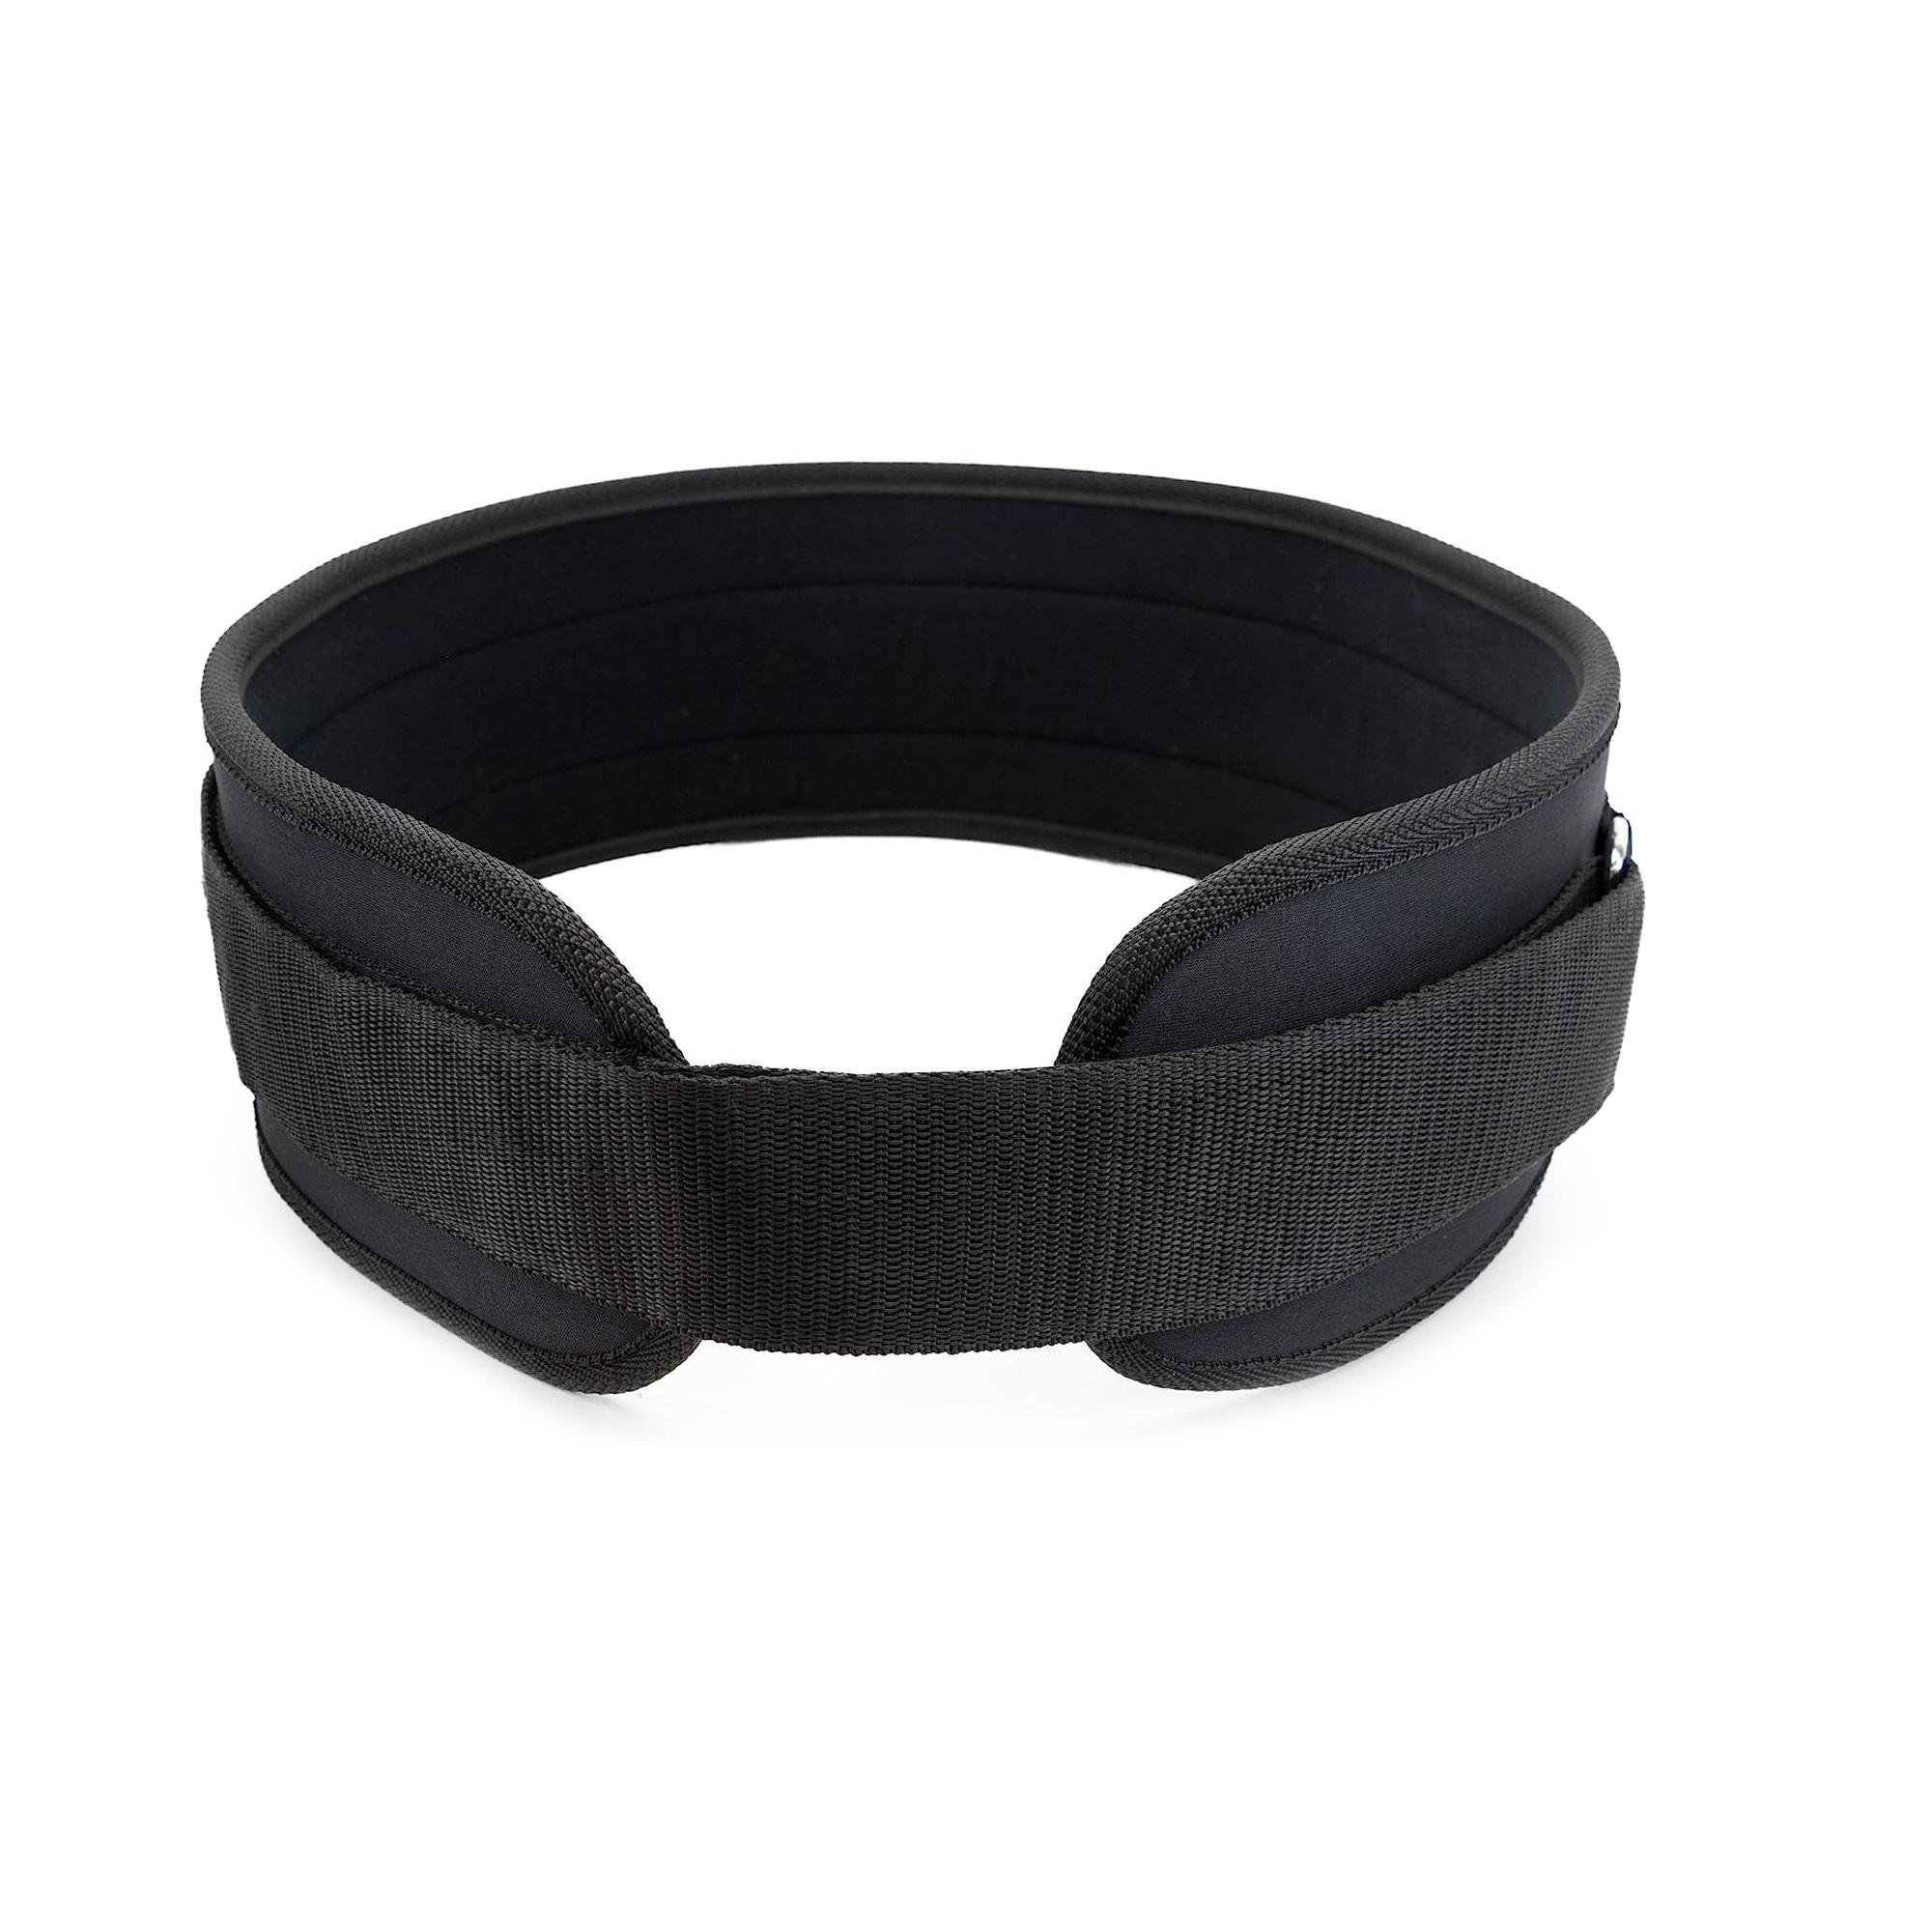 Neoprene Weight Lifting Belt – Strength Training Fitness Equipment, Great for Squatting, Deadlifts, & Power Lifting